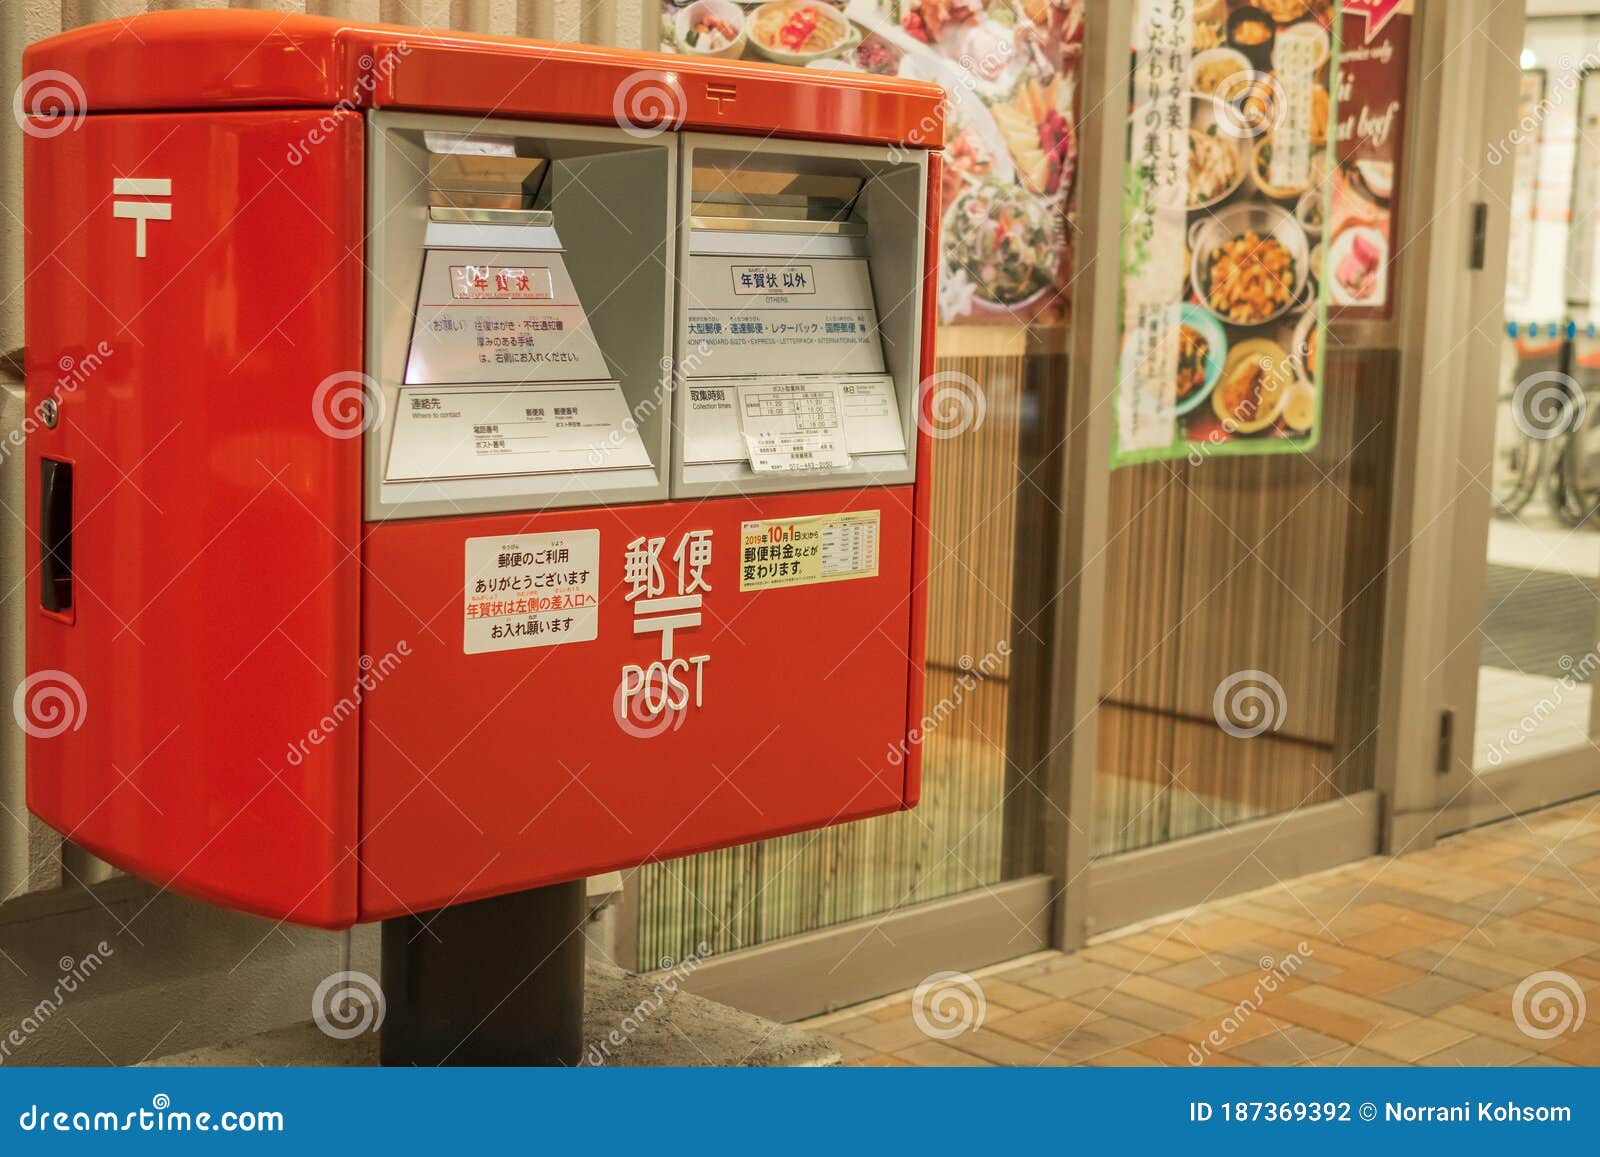 OSAKA, JAPAN December 16, 2019:Postboxes Can Be Found In, 45% OFF